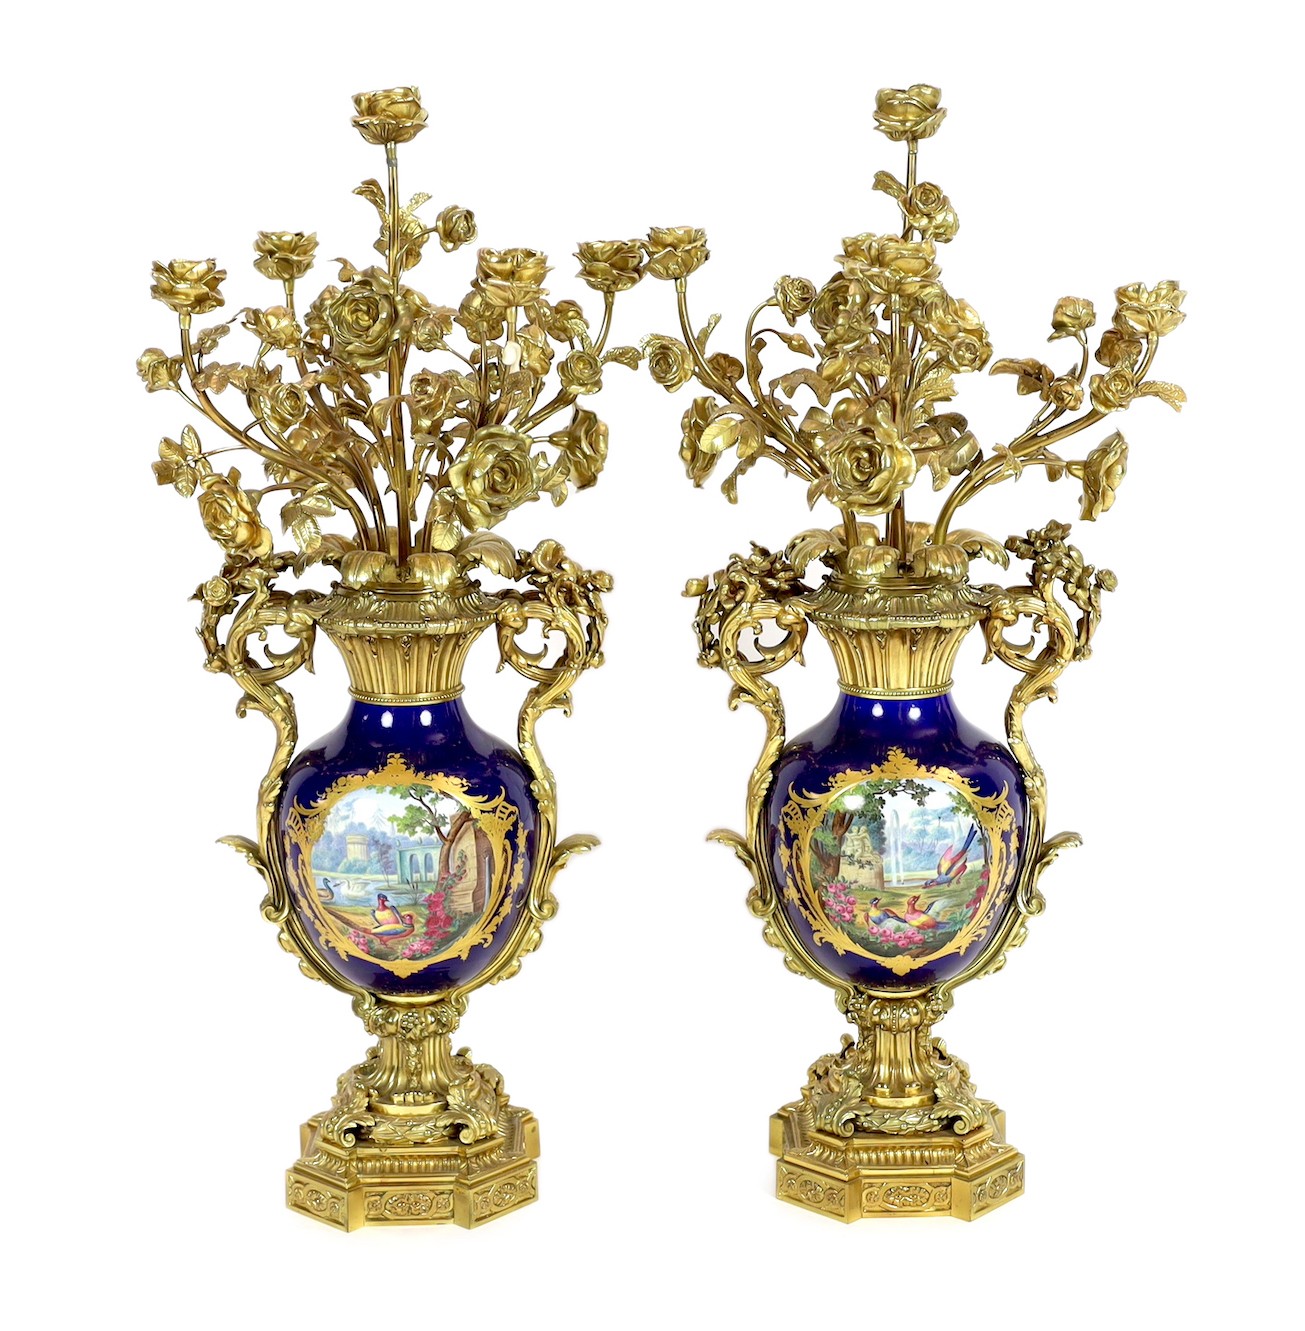 A pair of large French Sevres style ormolu mounted candelabra, in Louis XVI style, 19th century, 69cm high                                                                                                                  